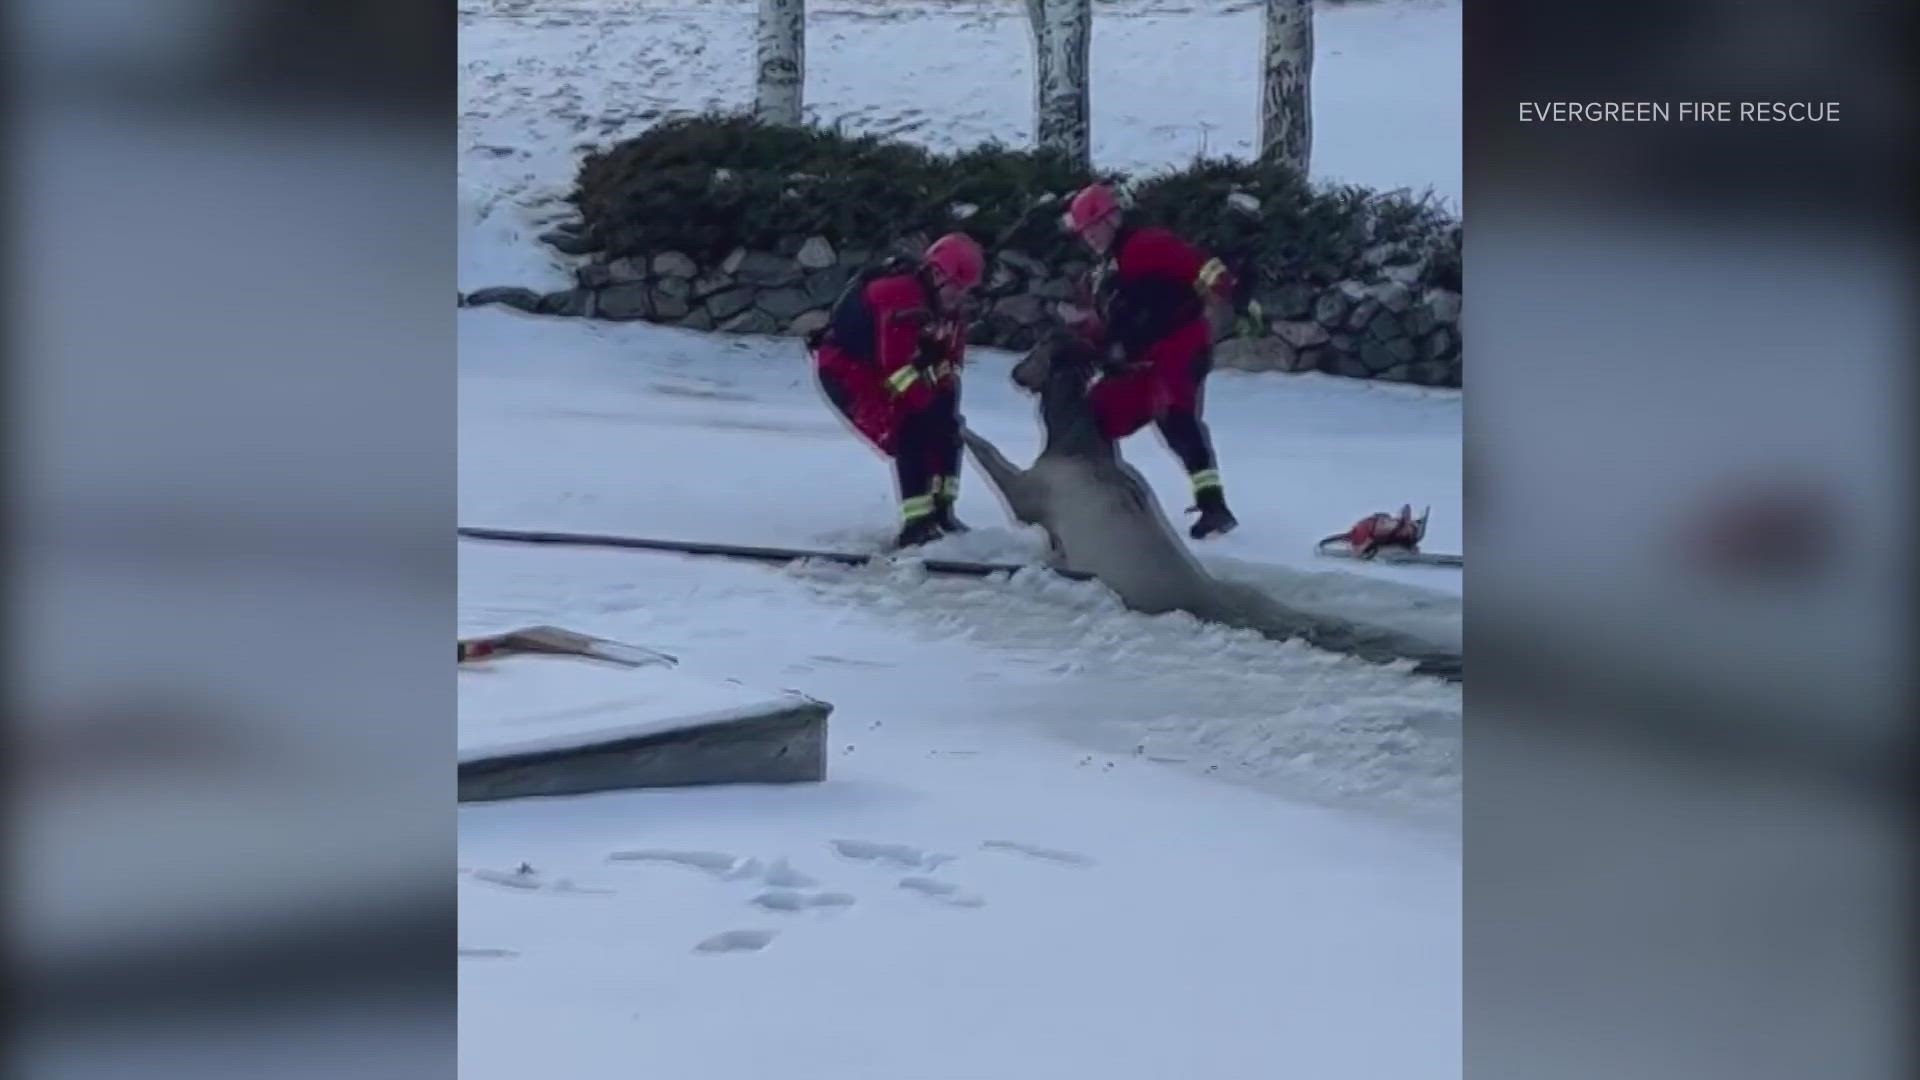 Crews from Evergreen Fire Rescue were called out to an icy pond near Timbervale Drive Friday.